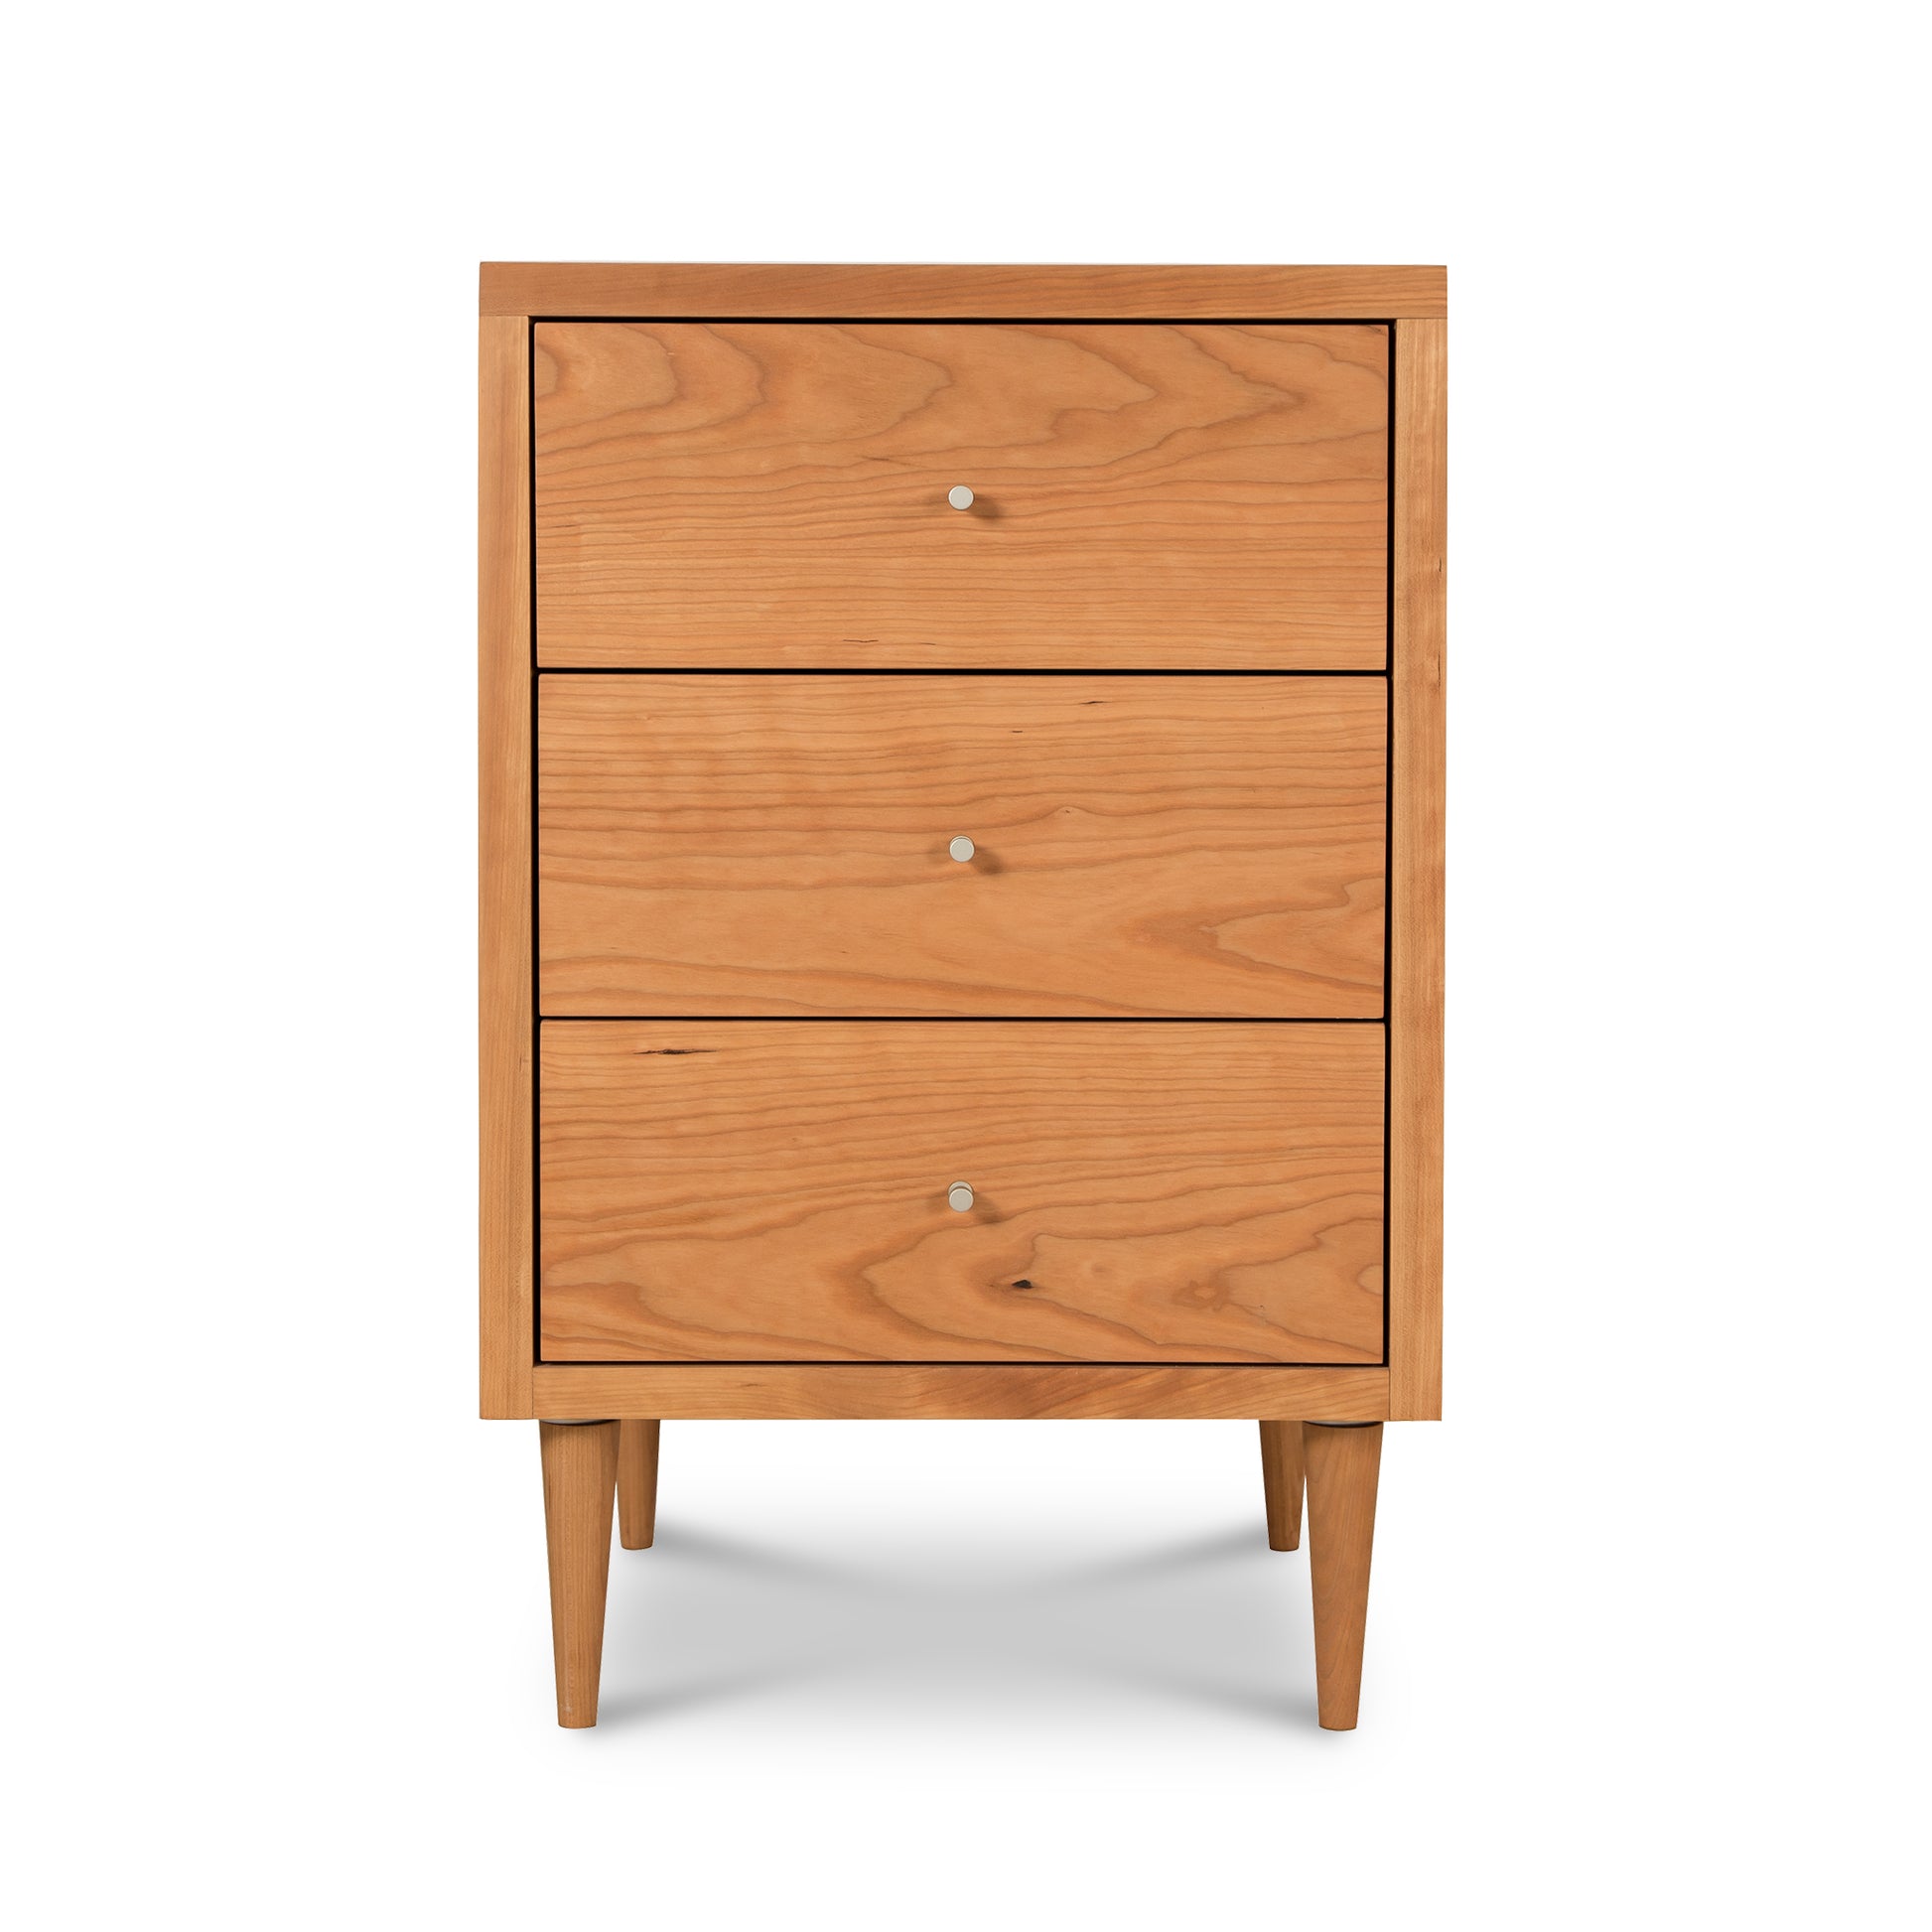 A mid-century modern Vermont Furniture Designs Larssen 3-Drawer Nightstand with tapered legs isolated on a white background.